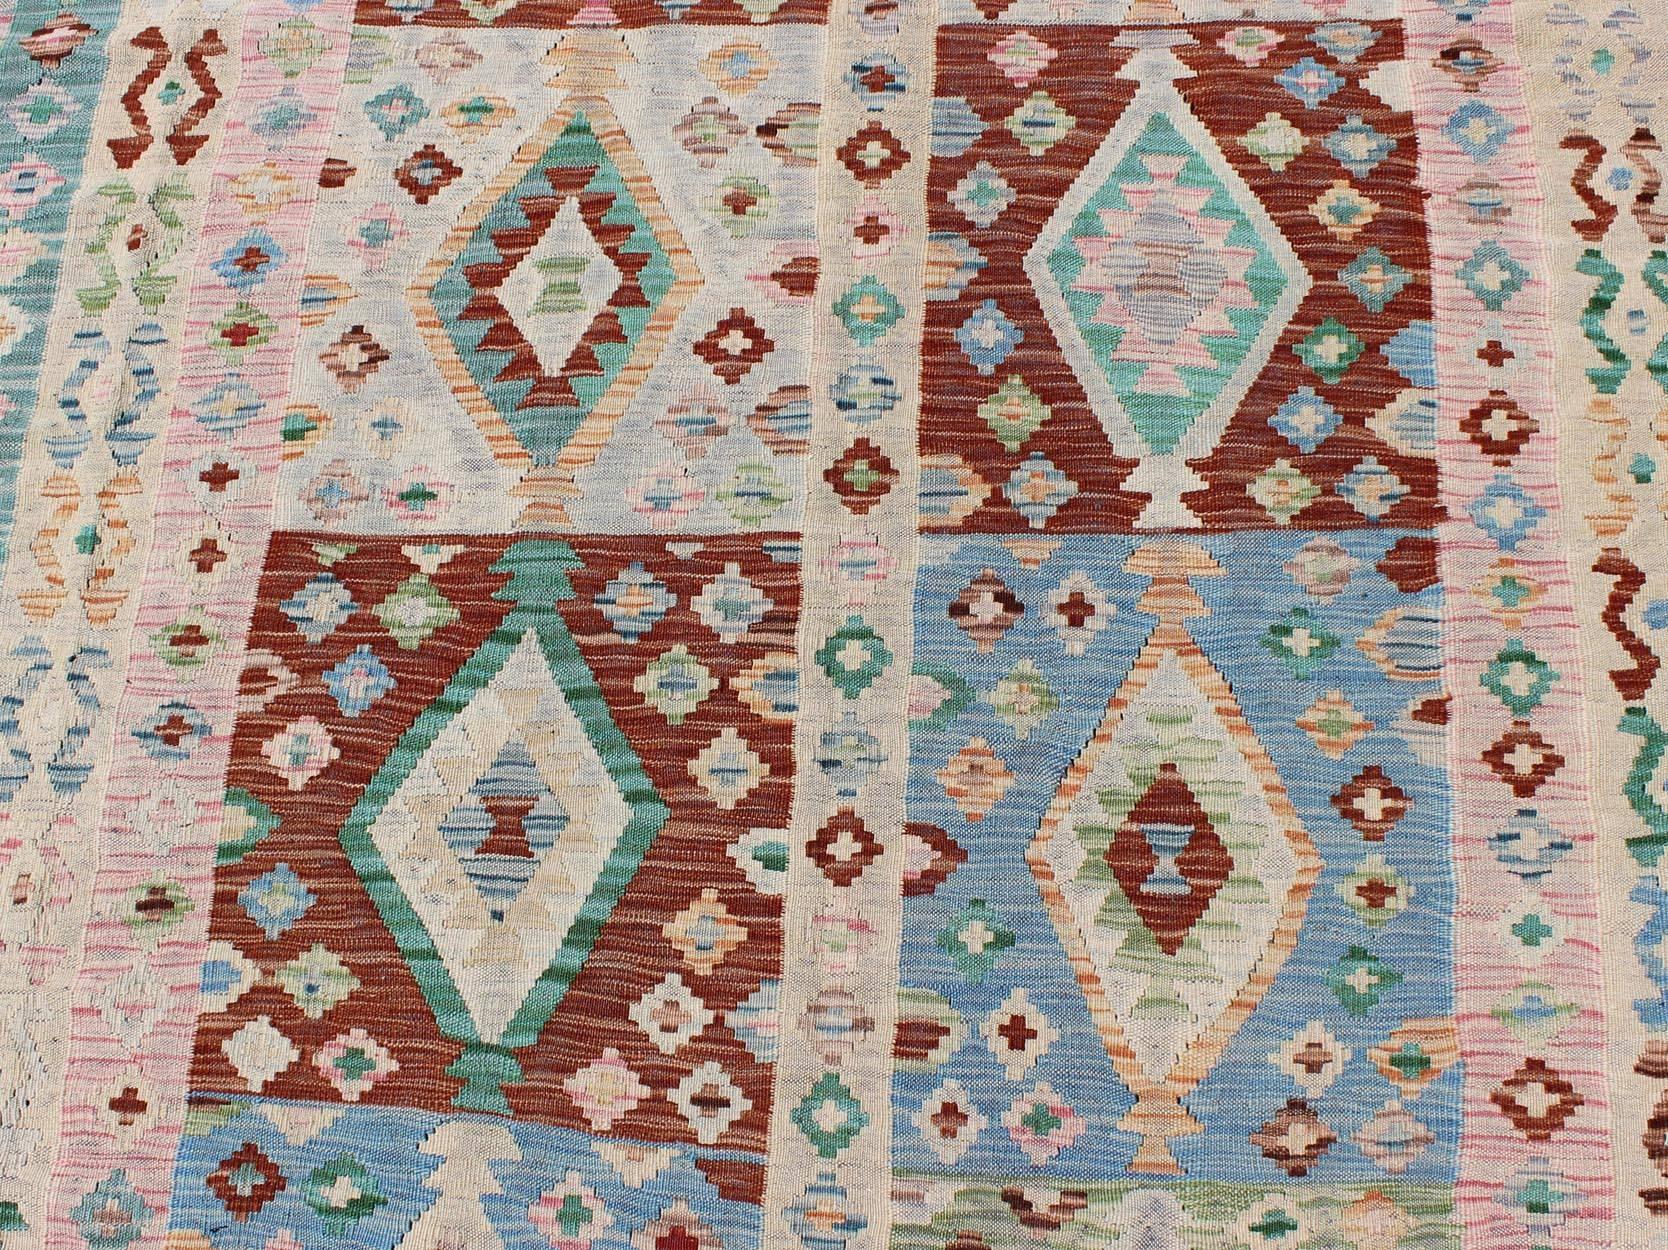 Hand-Woven Geometric Flat Weave Kilim Rug in Blue, Green, Cream & Pink with Diamond Design  For Sale